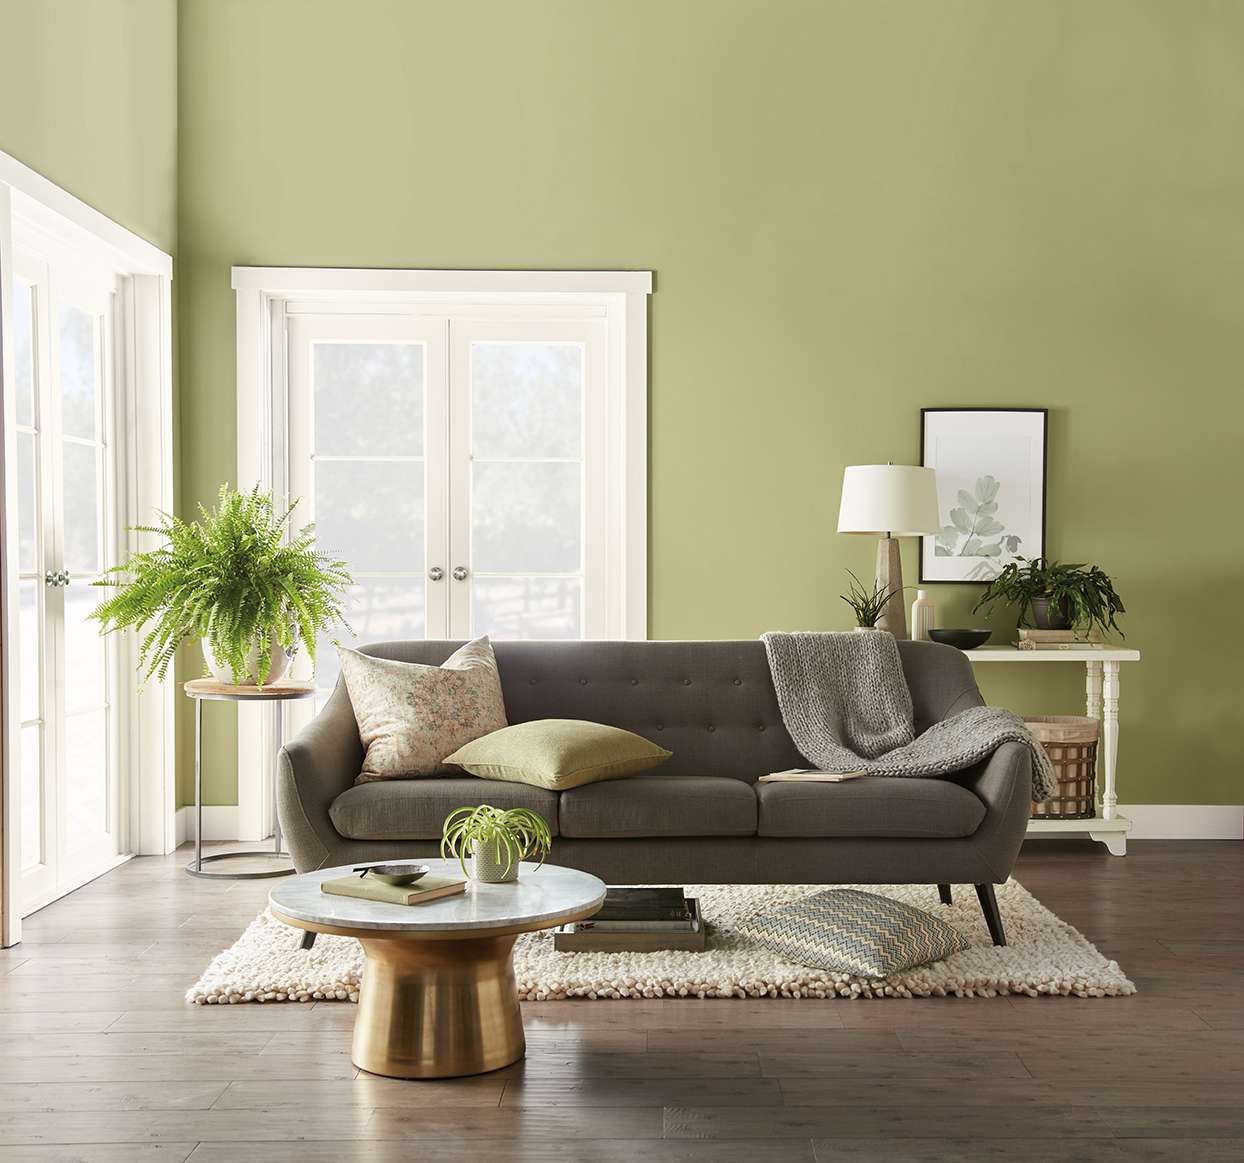 Paint Company And Industry Expert Predictions For 2020 Color